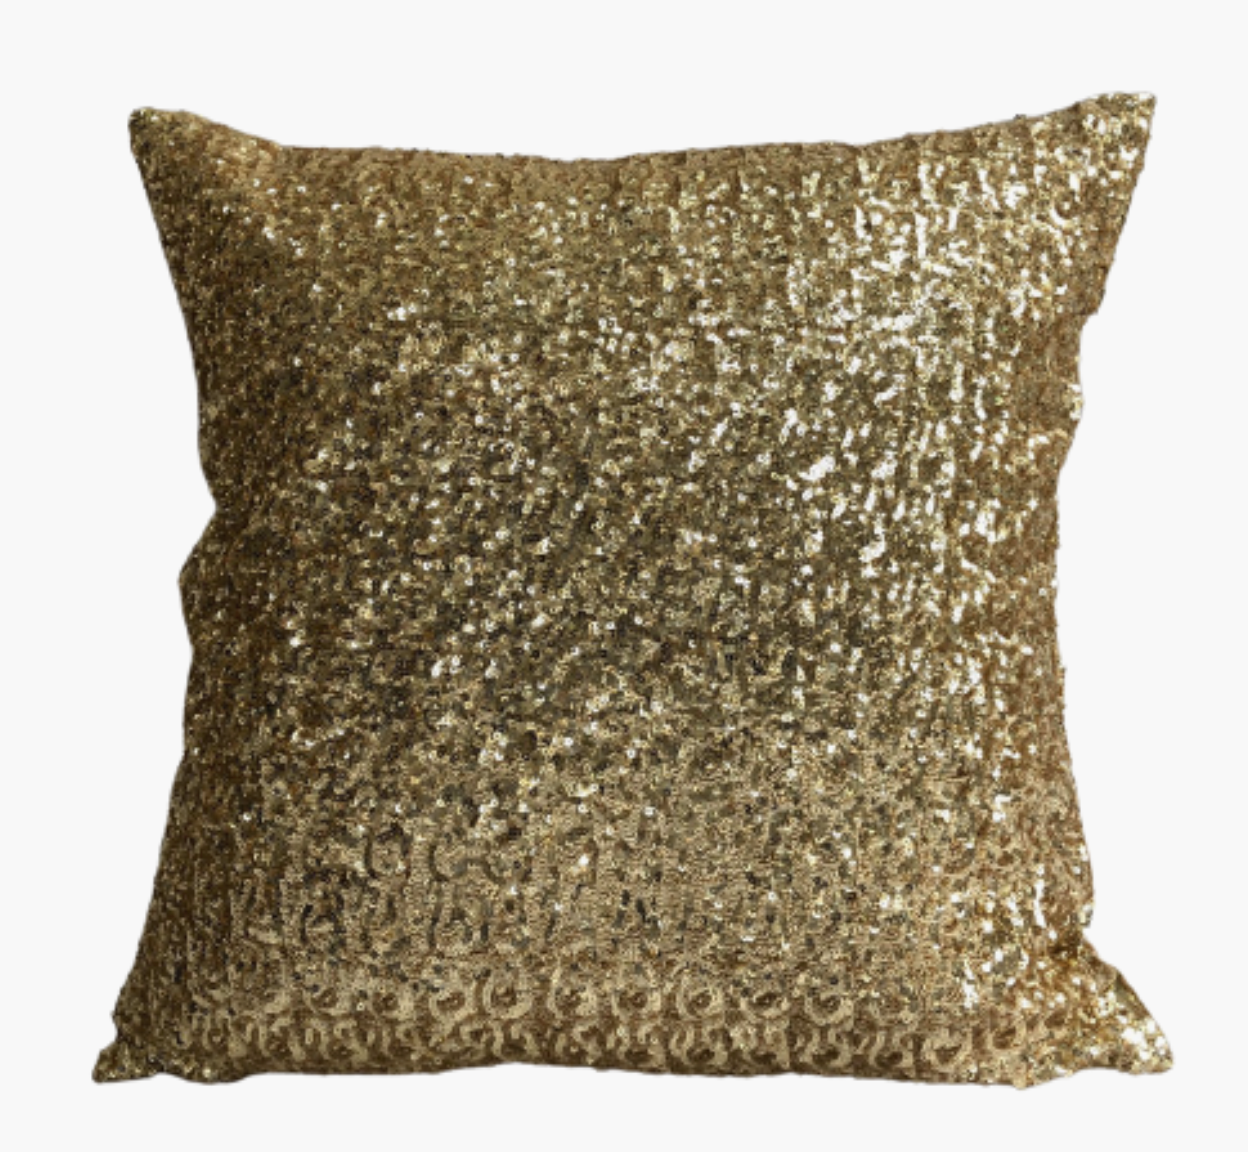 Sparkly Sequinned Gold Cushion Cover